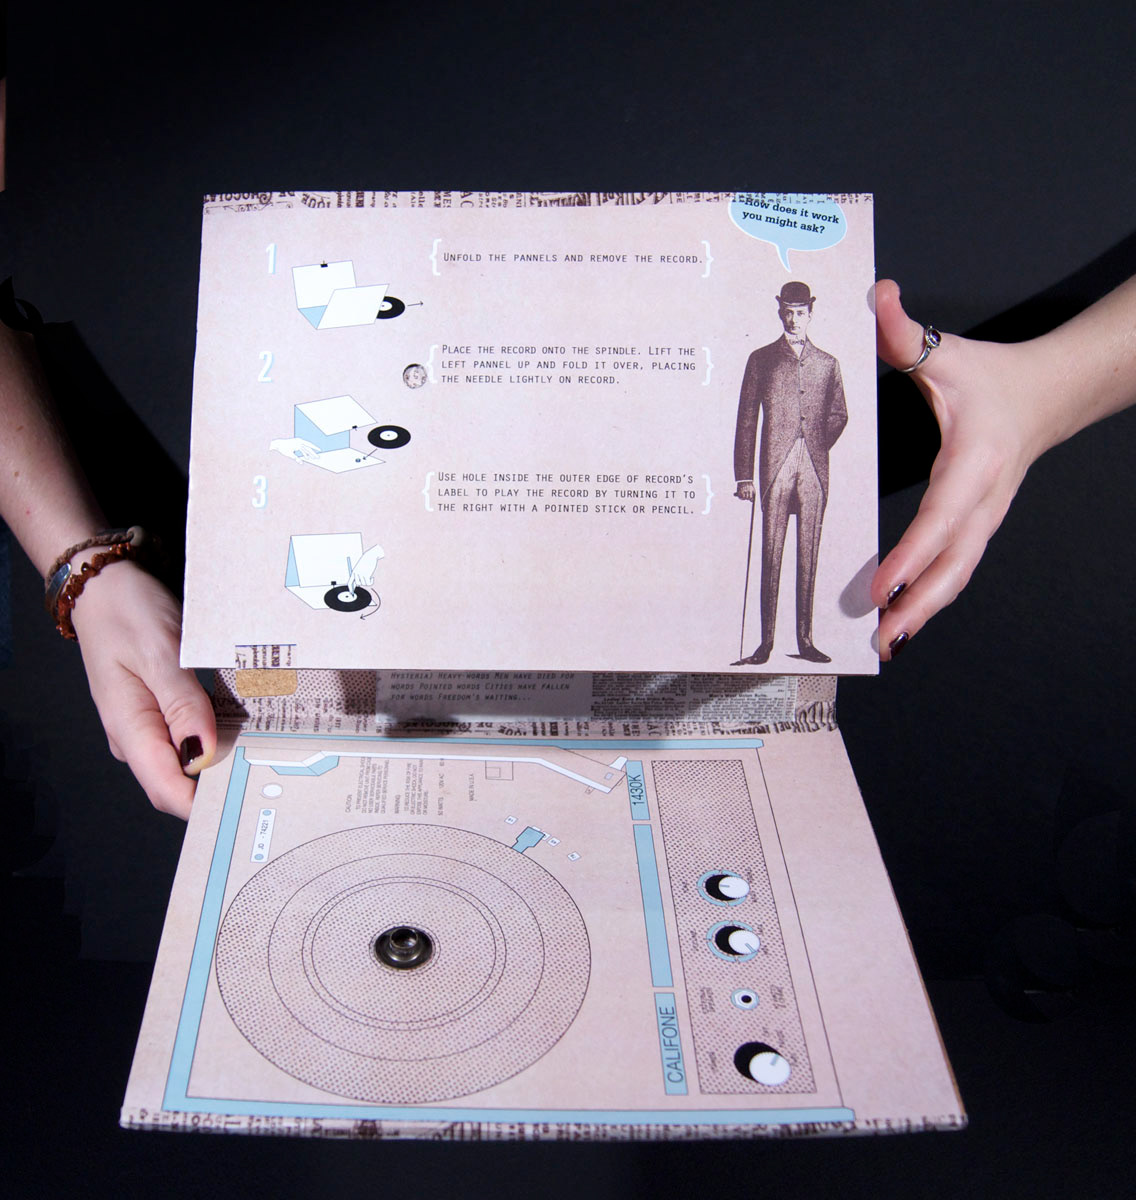 mailer record vinyl Packaging Promotional Mailer cardboard music band